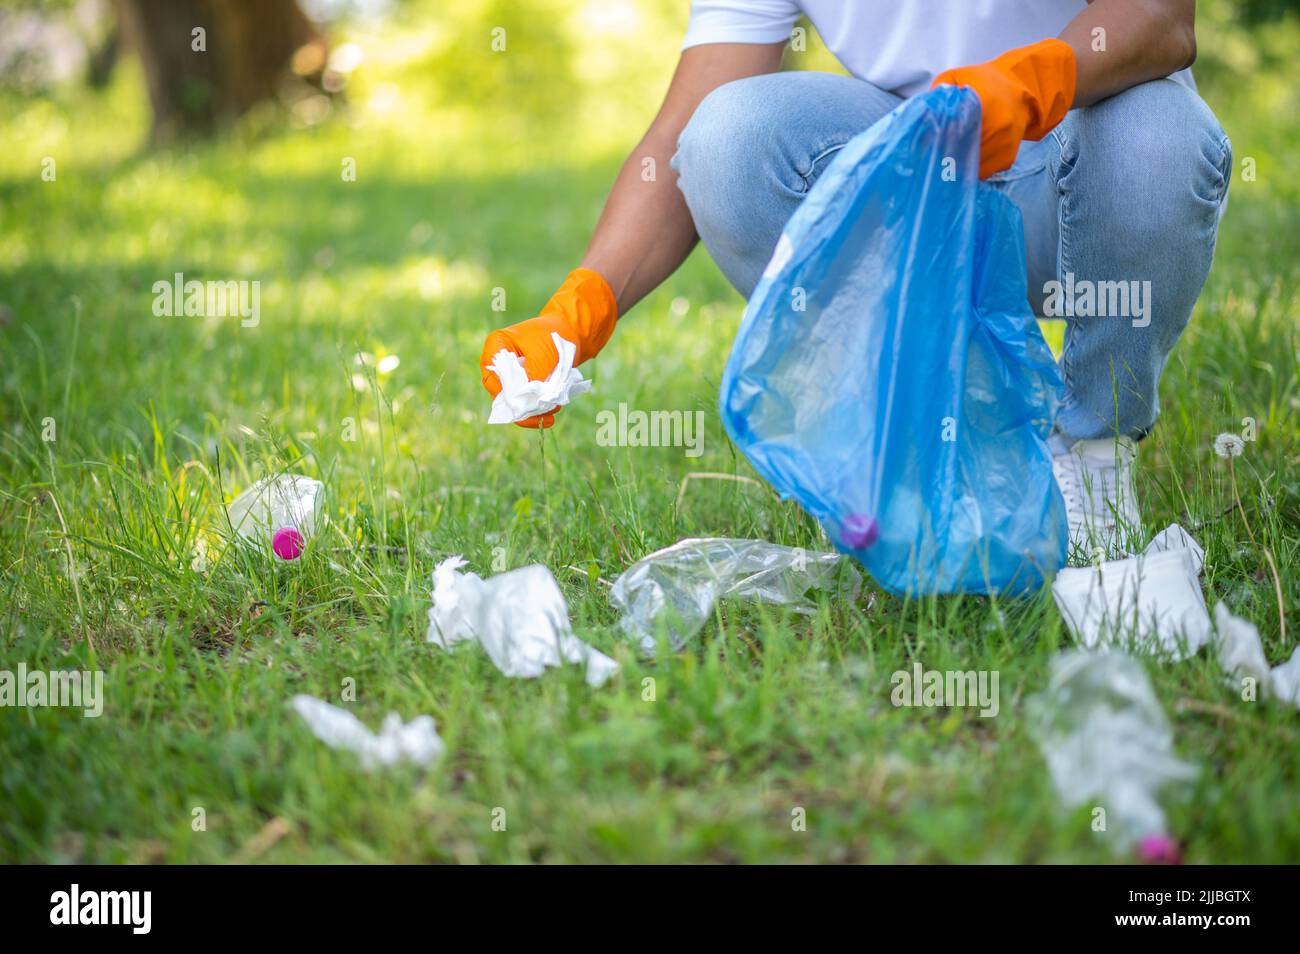 Man crouched picking up trash in park Stock Photo